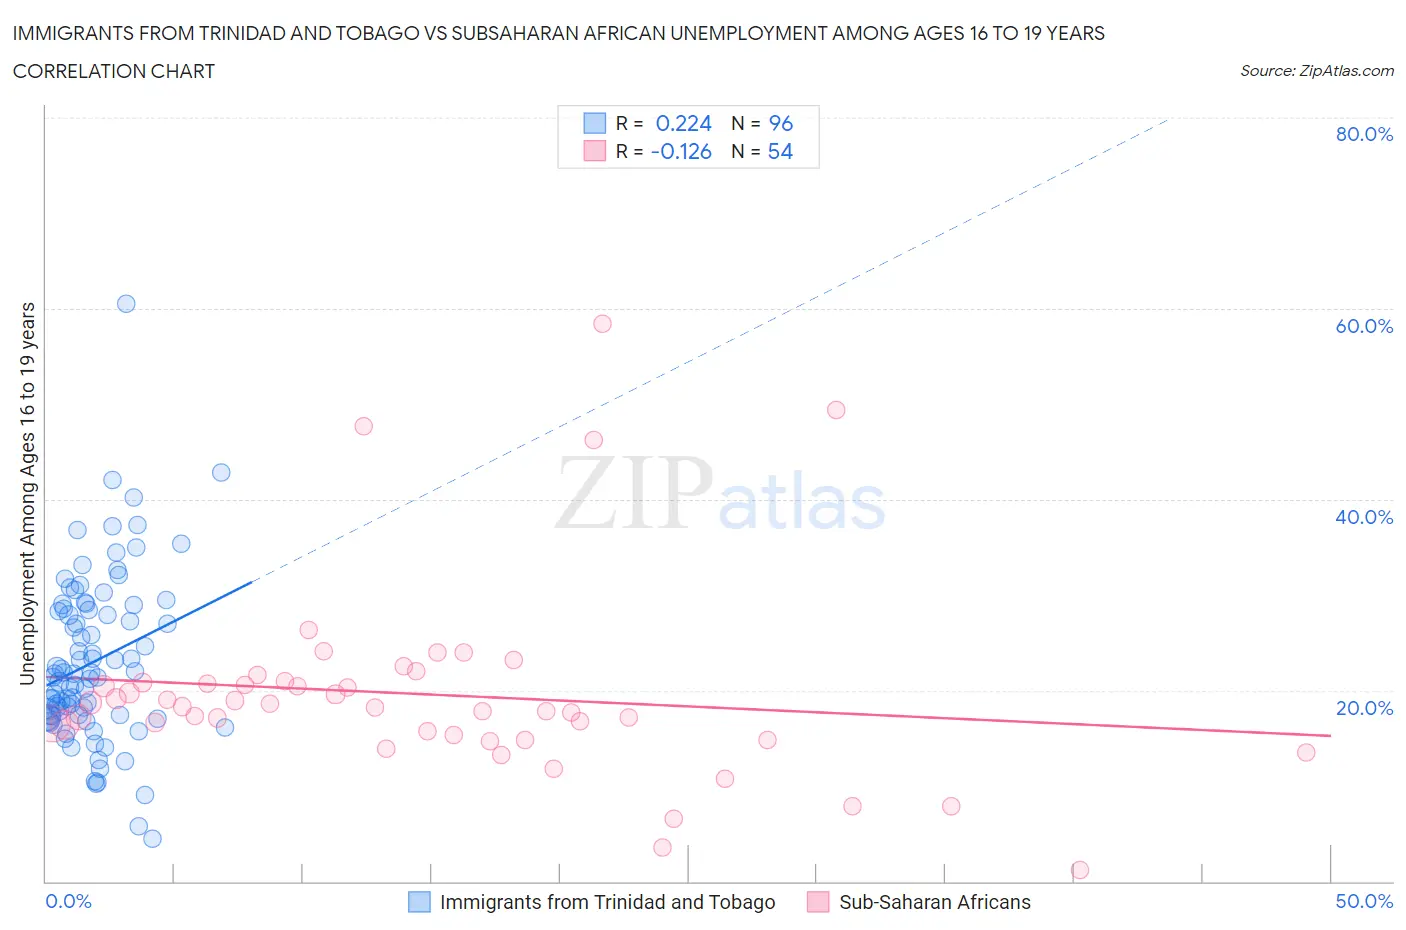 Immigrants from Trinidad and Tobago vs Subsaharan African Unemployment Among Ages 16 to 19 years